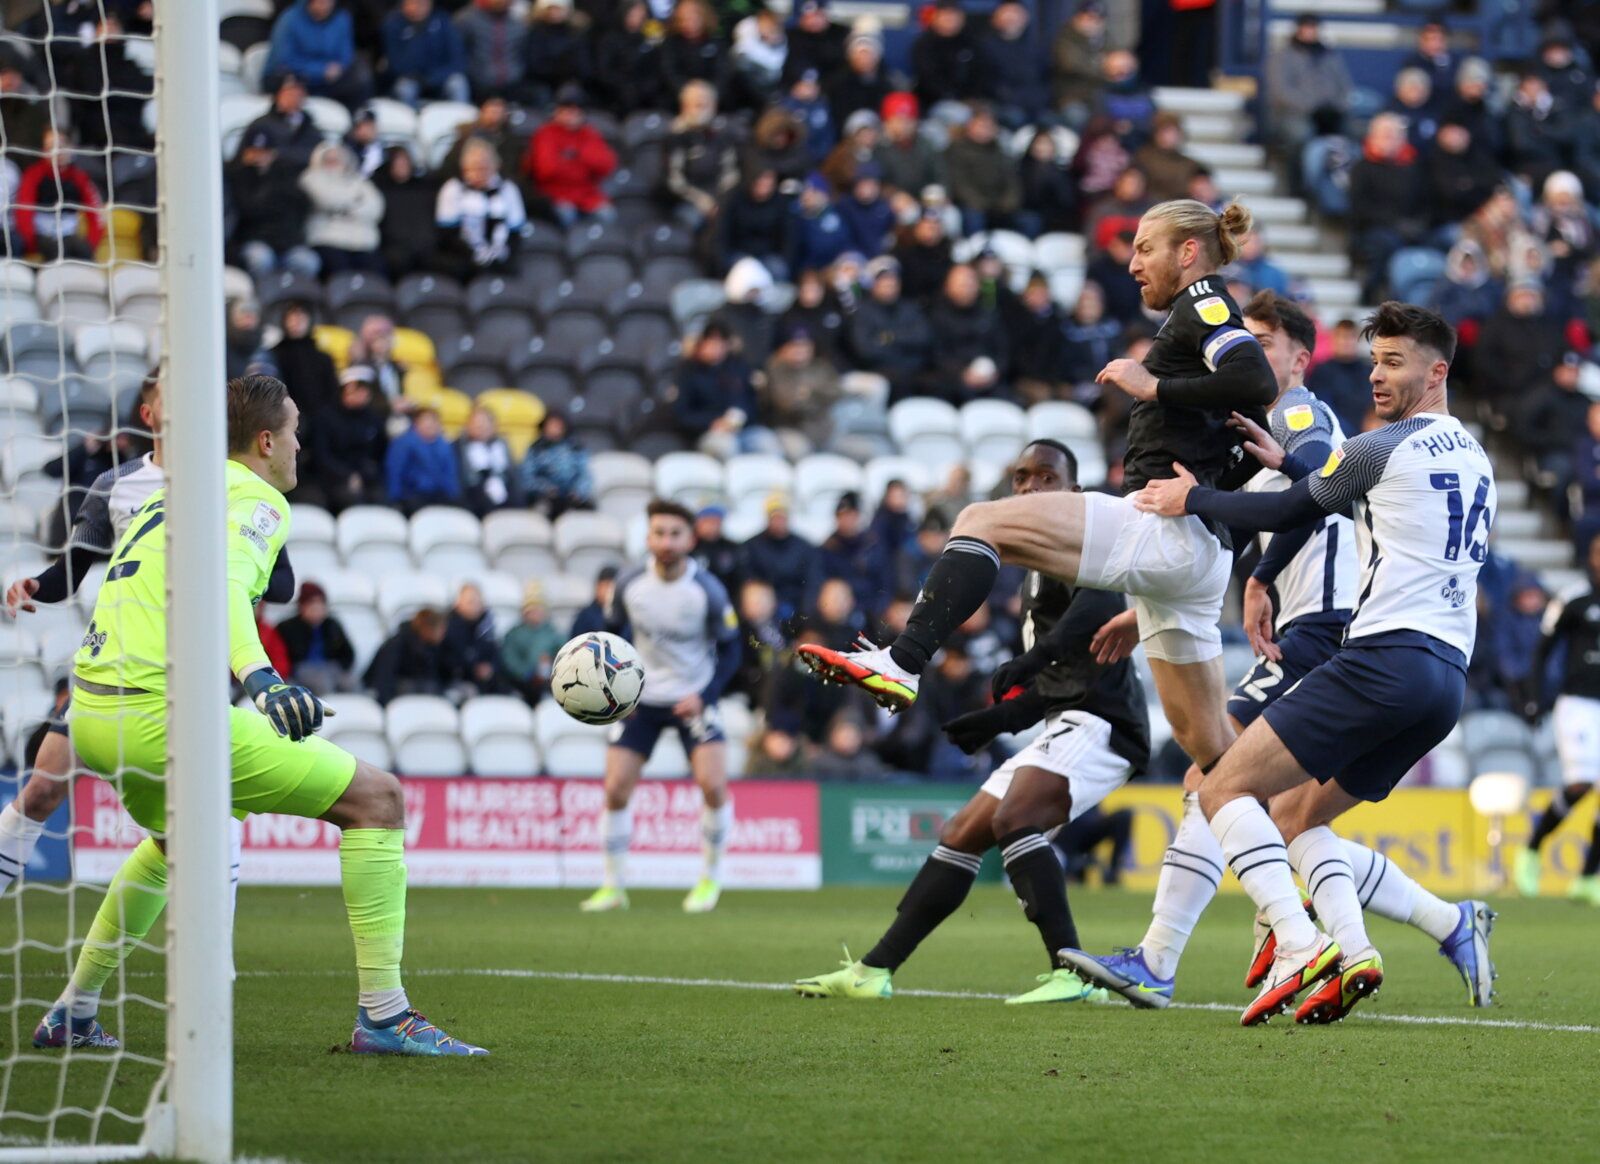 Soccer Football - Championship - Preston North End v Fulham - Deepdale, Preston, Britain - November 27, 2021 Fulham's Tim Ream scores their first goal  Action Images/Molly Darlington